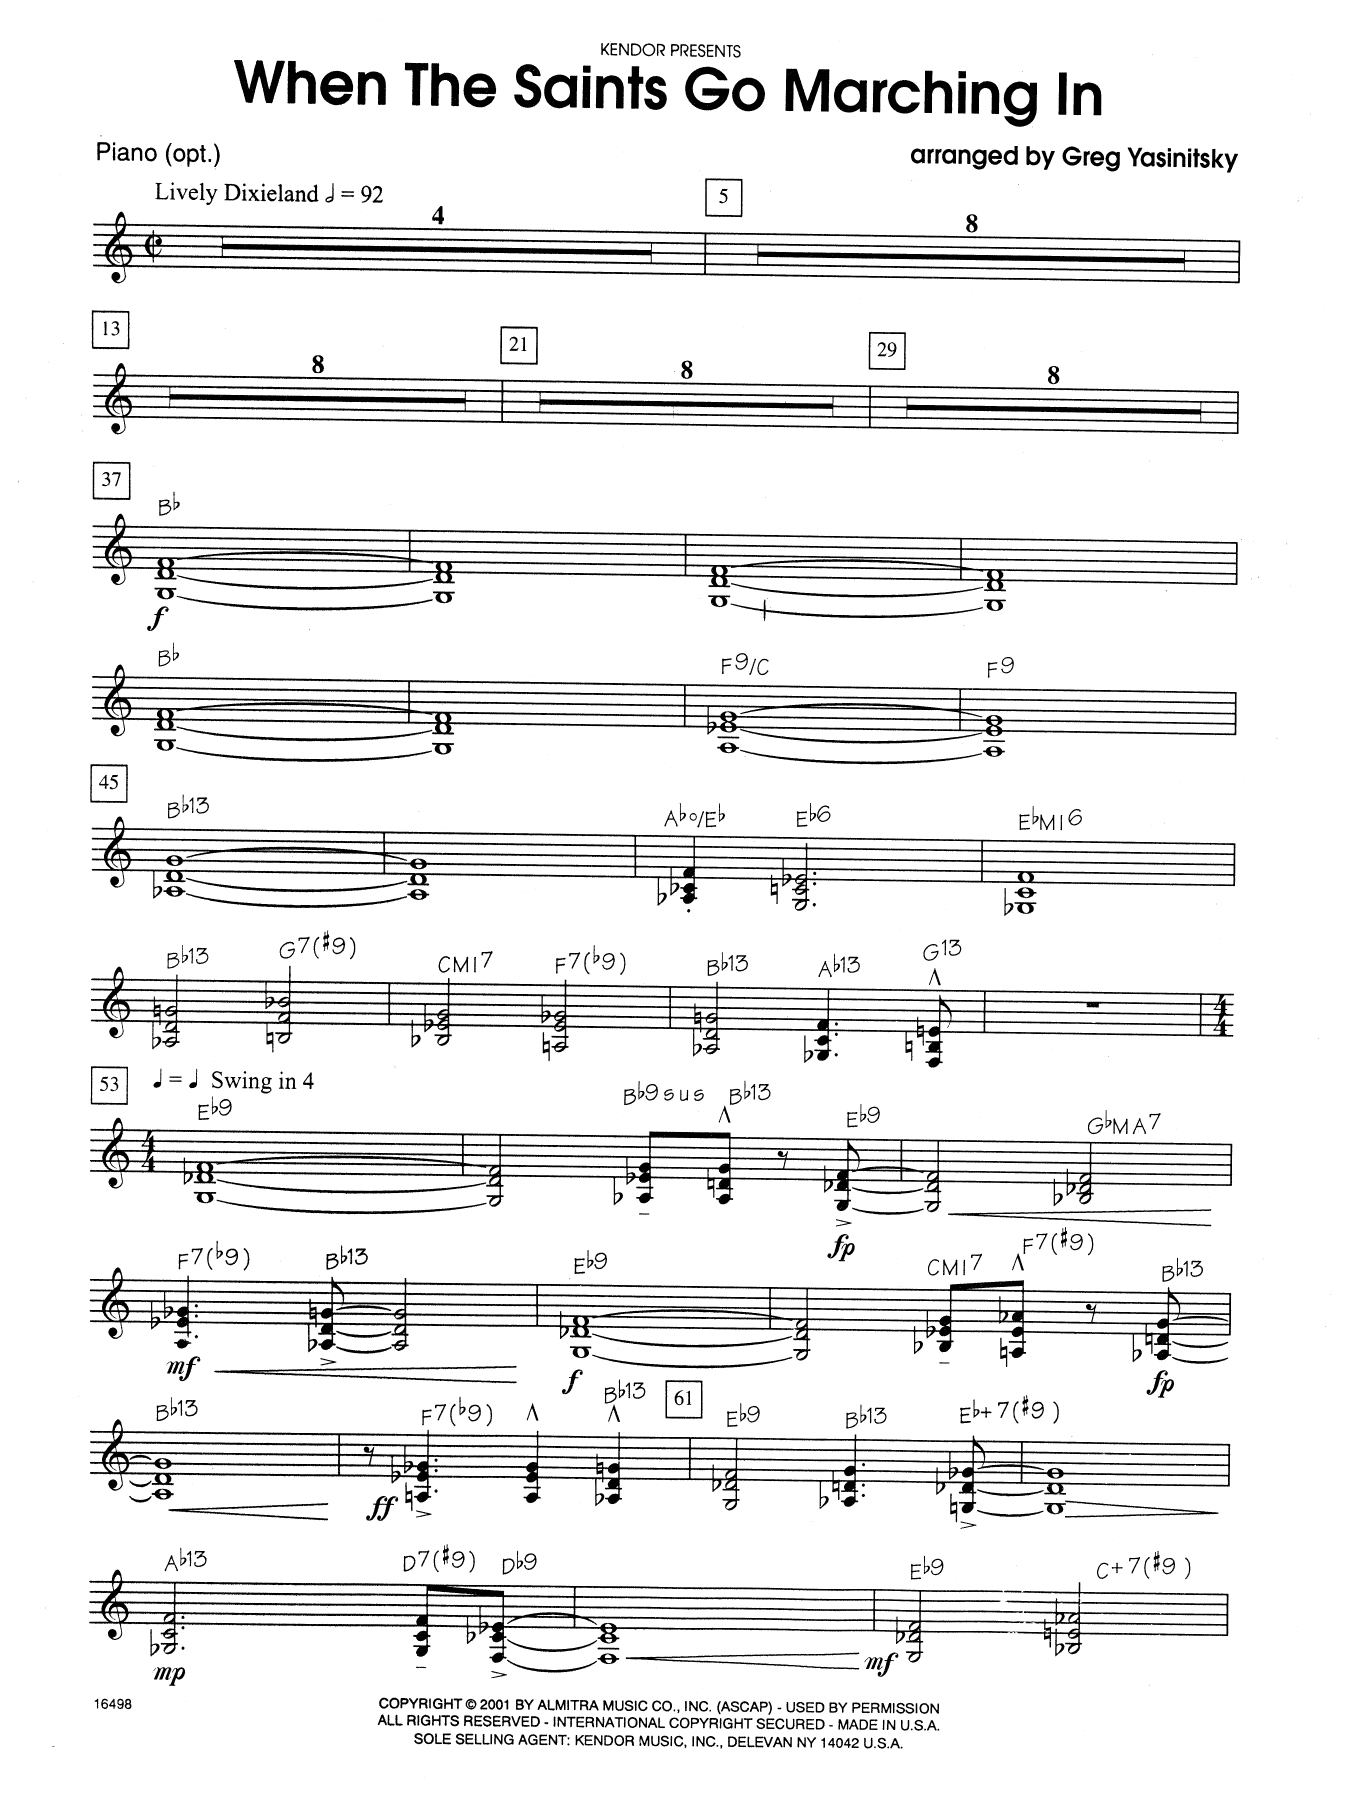 Gregory Yasinitsky When the Saints Go Marching In - Piano sheet music notes and chords. Download Printable PDF.